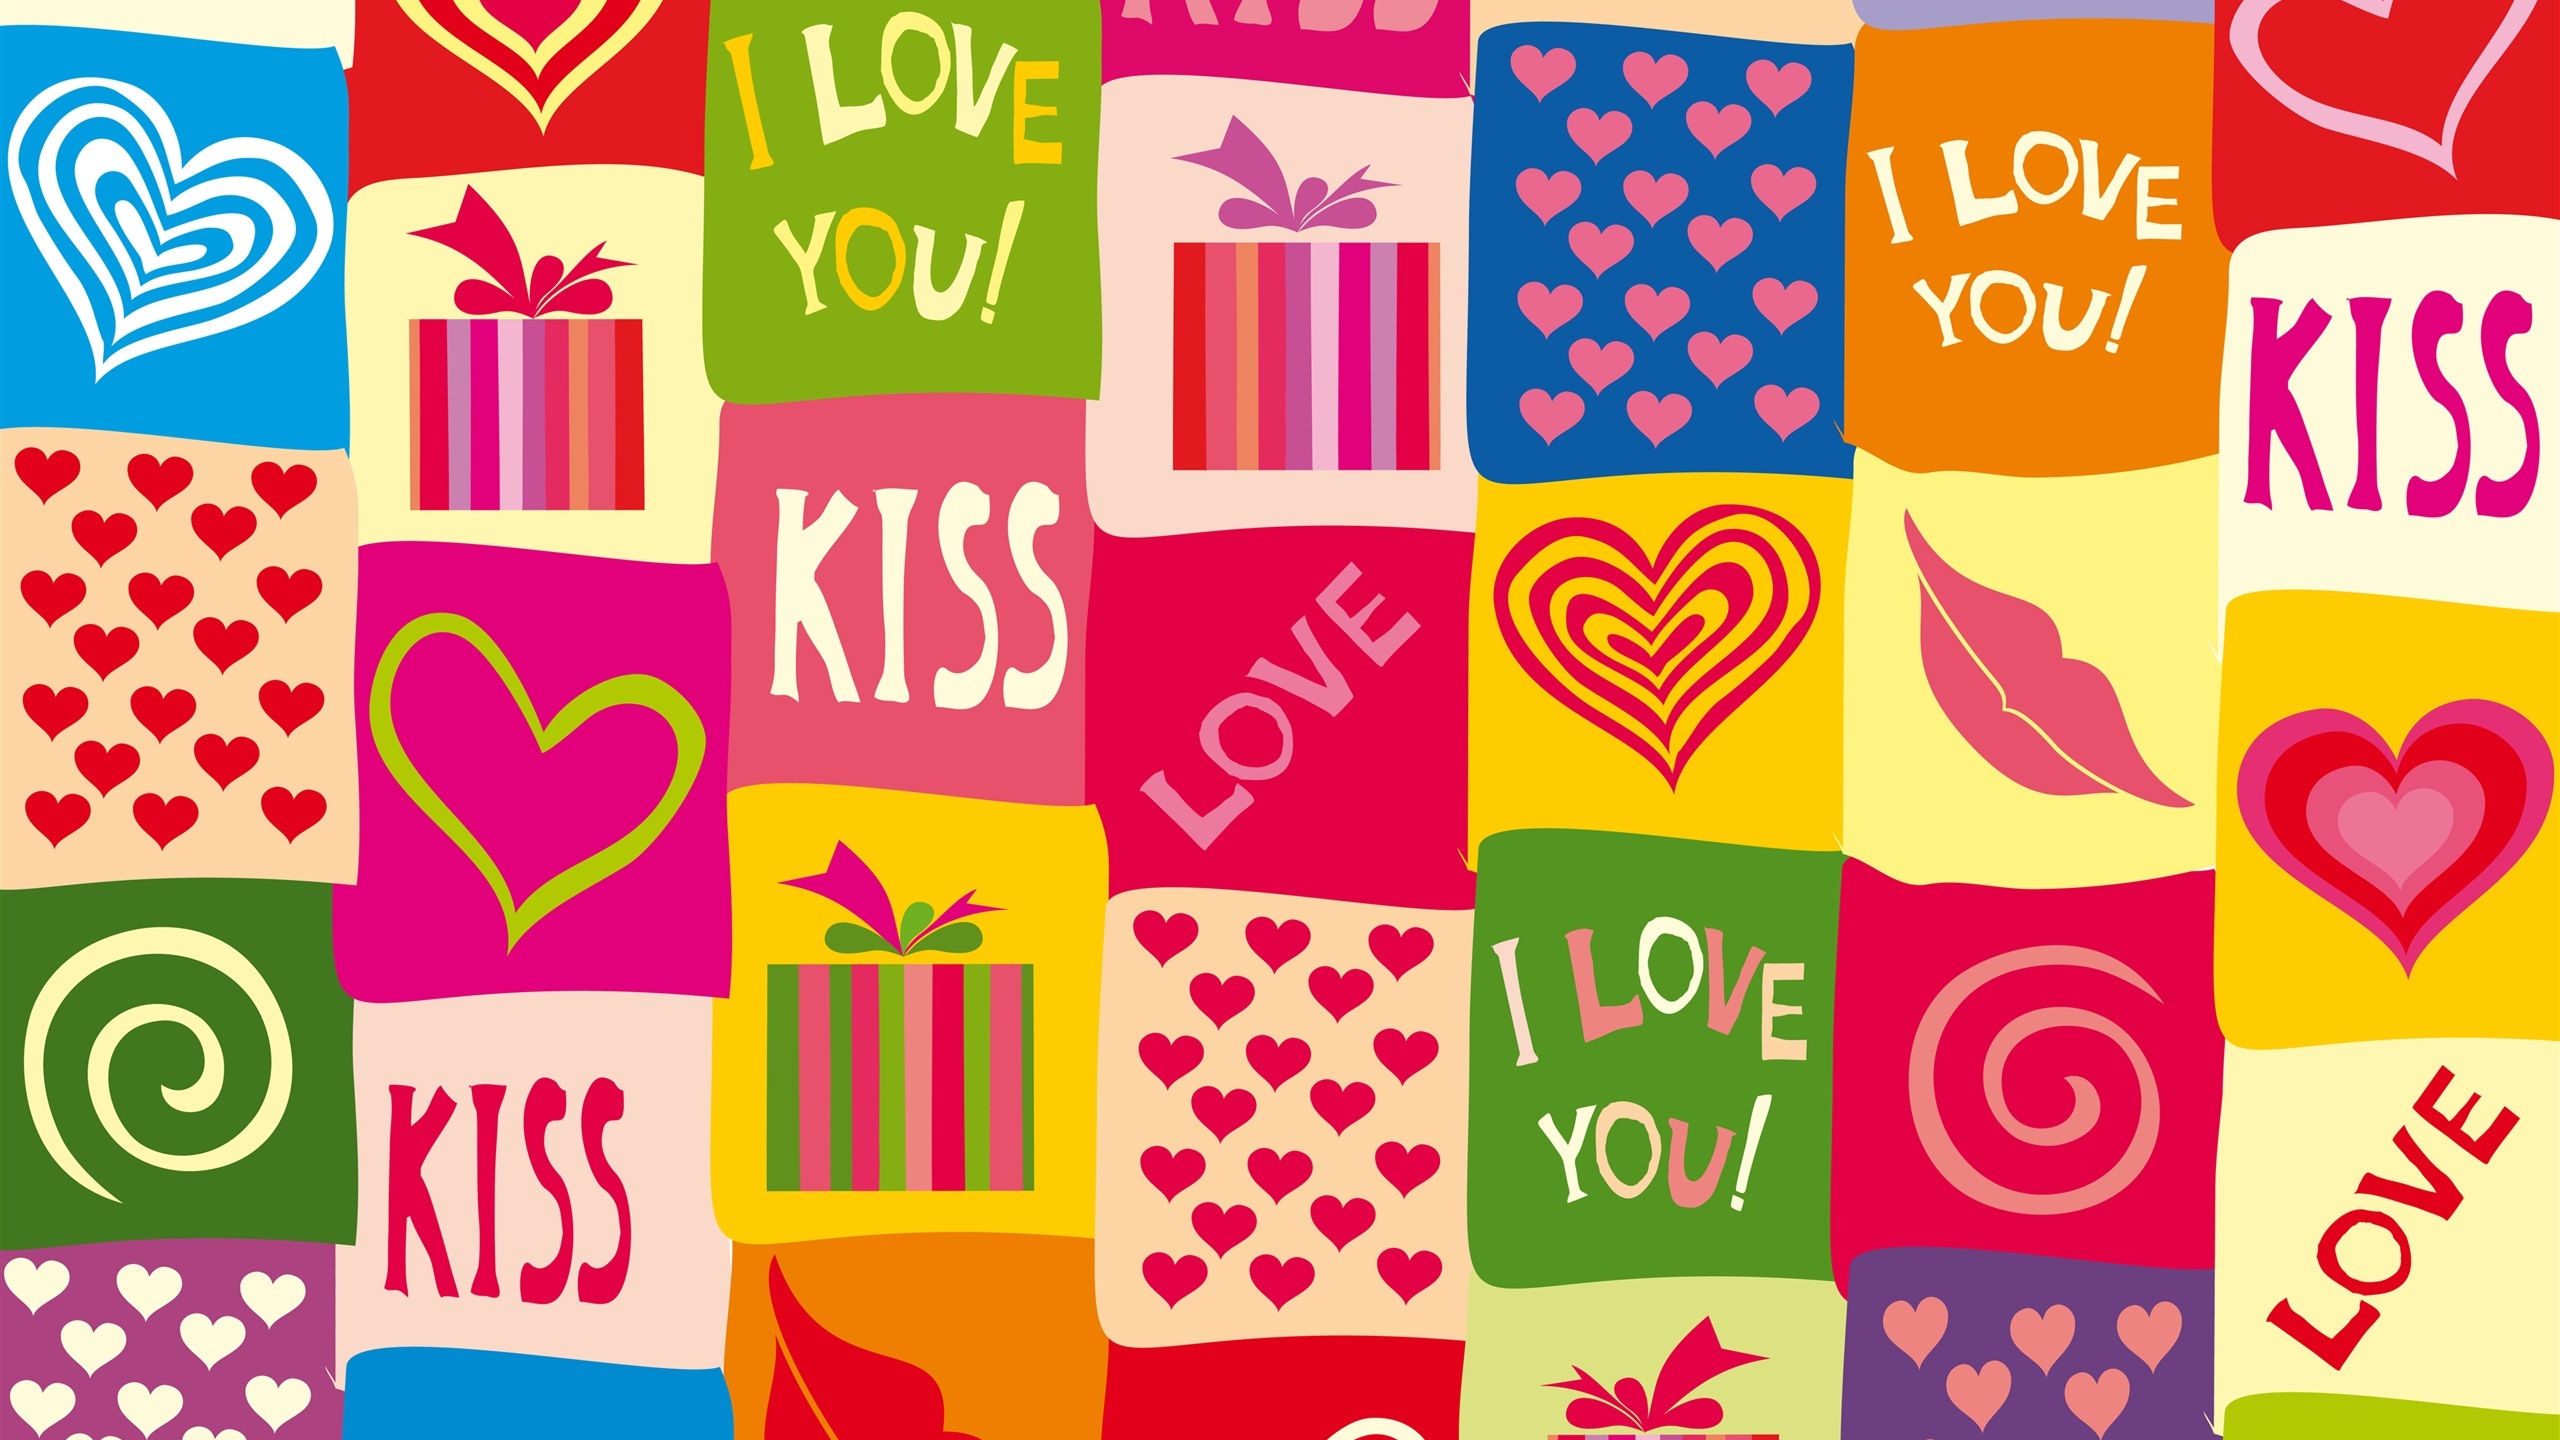 Love Note Kiss Note Colorful 2560x1440